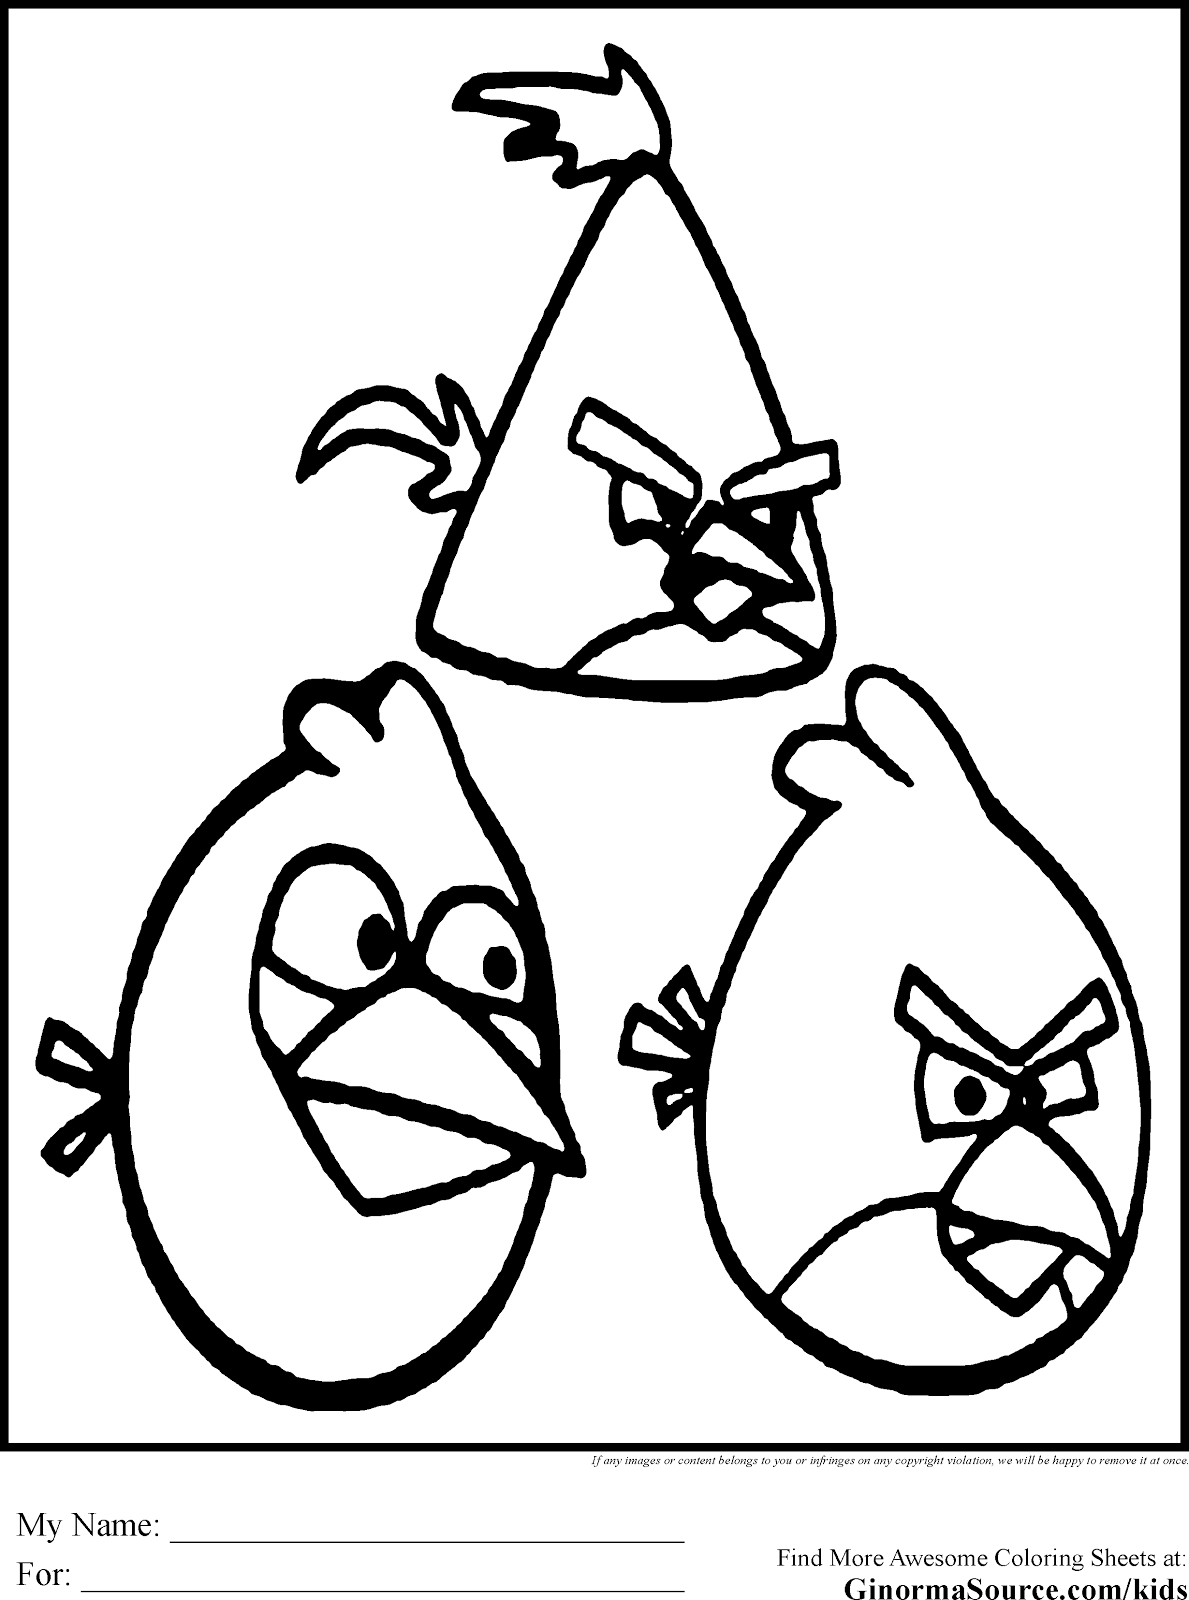 Download Unique Comics Animation: most useful angry birds coloring ...